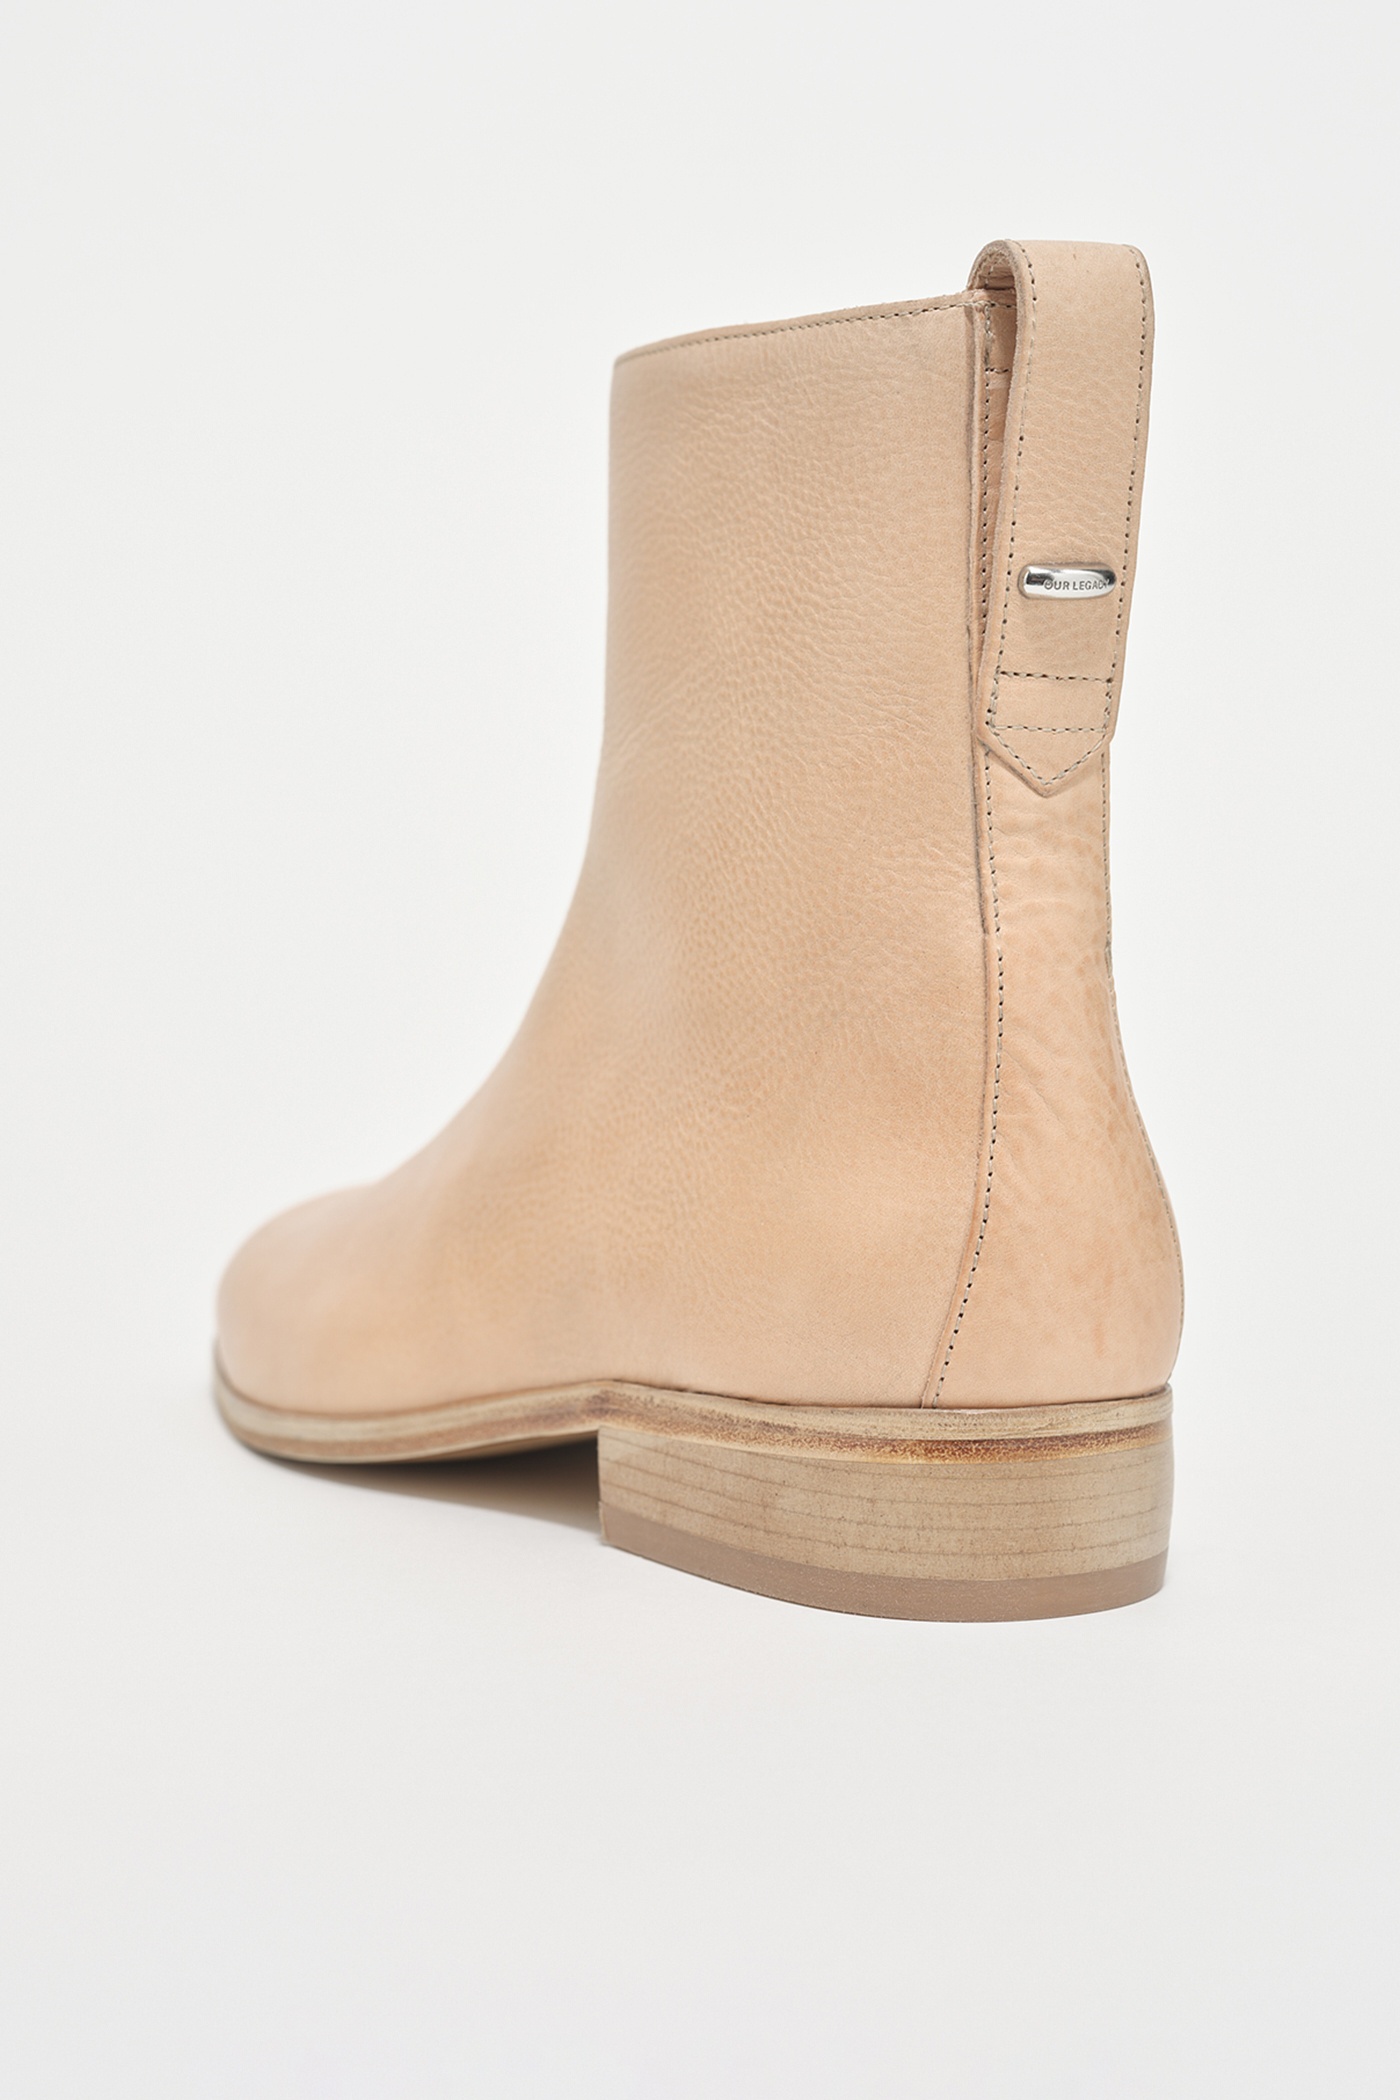 Michaelis Boot Waxy Natural Tan Leather - 3